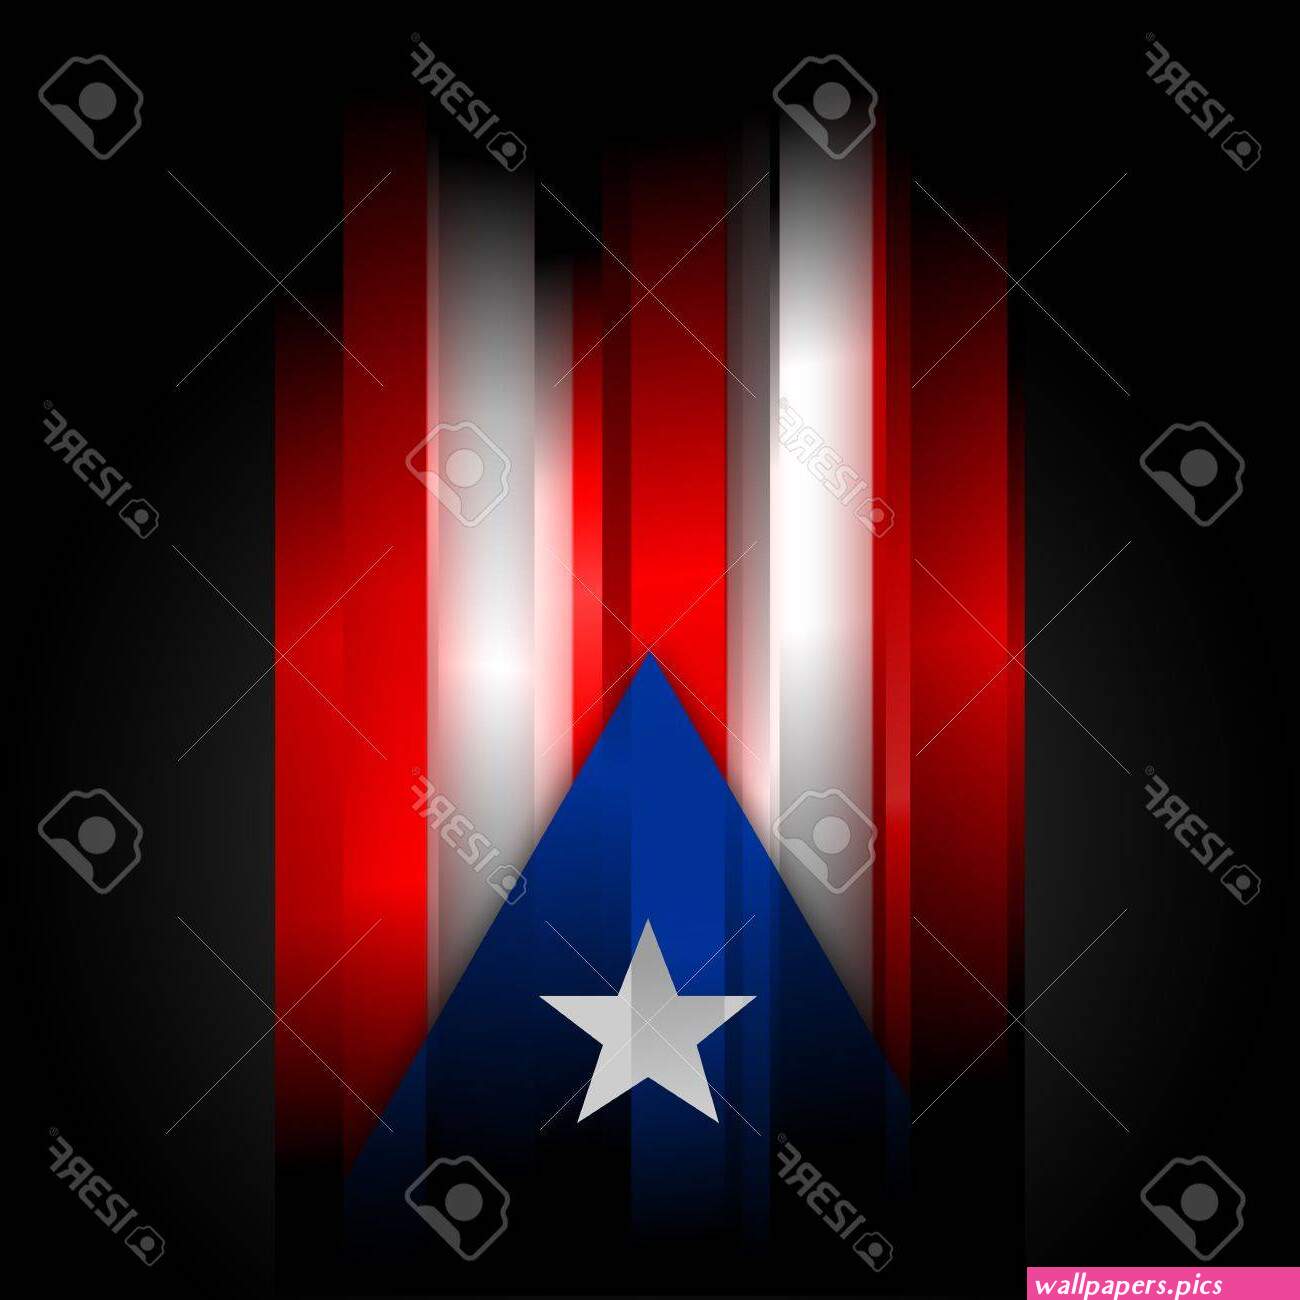 The Abstract Puerto Rico Flag On Black Background Stock Photo Picture and Royalty Free Image. Image 5314949.